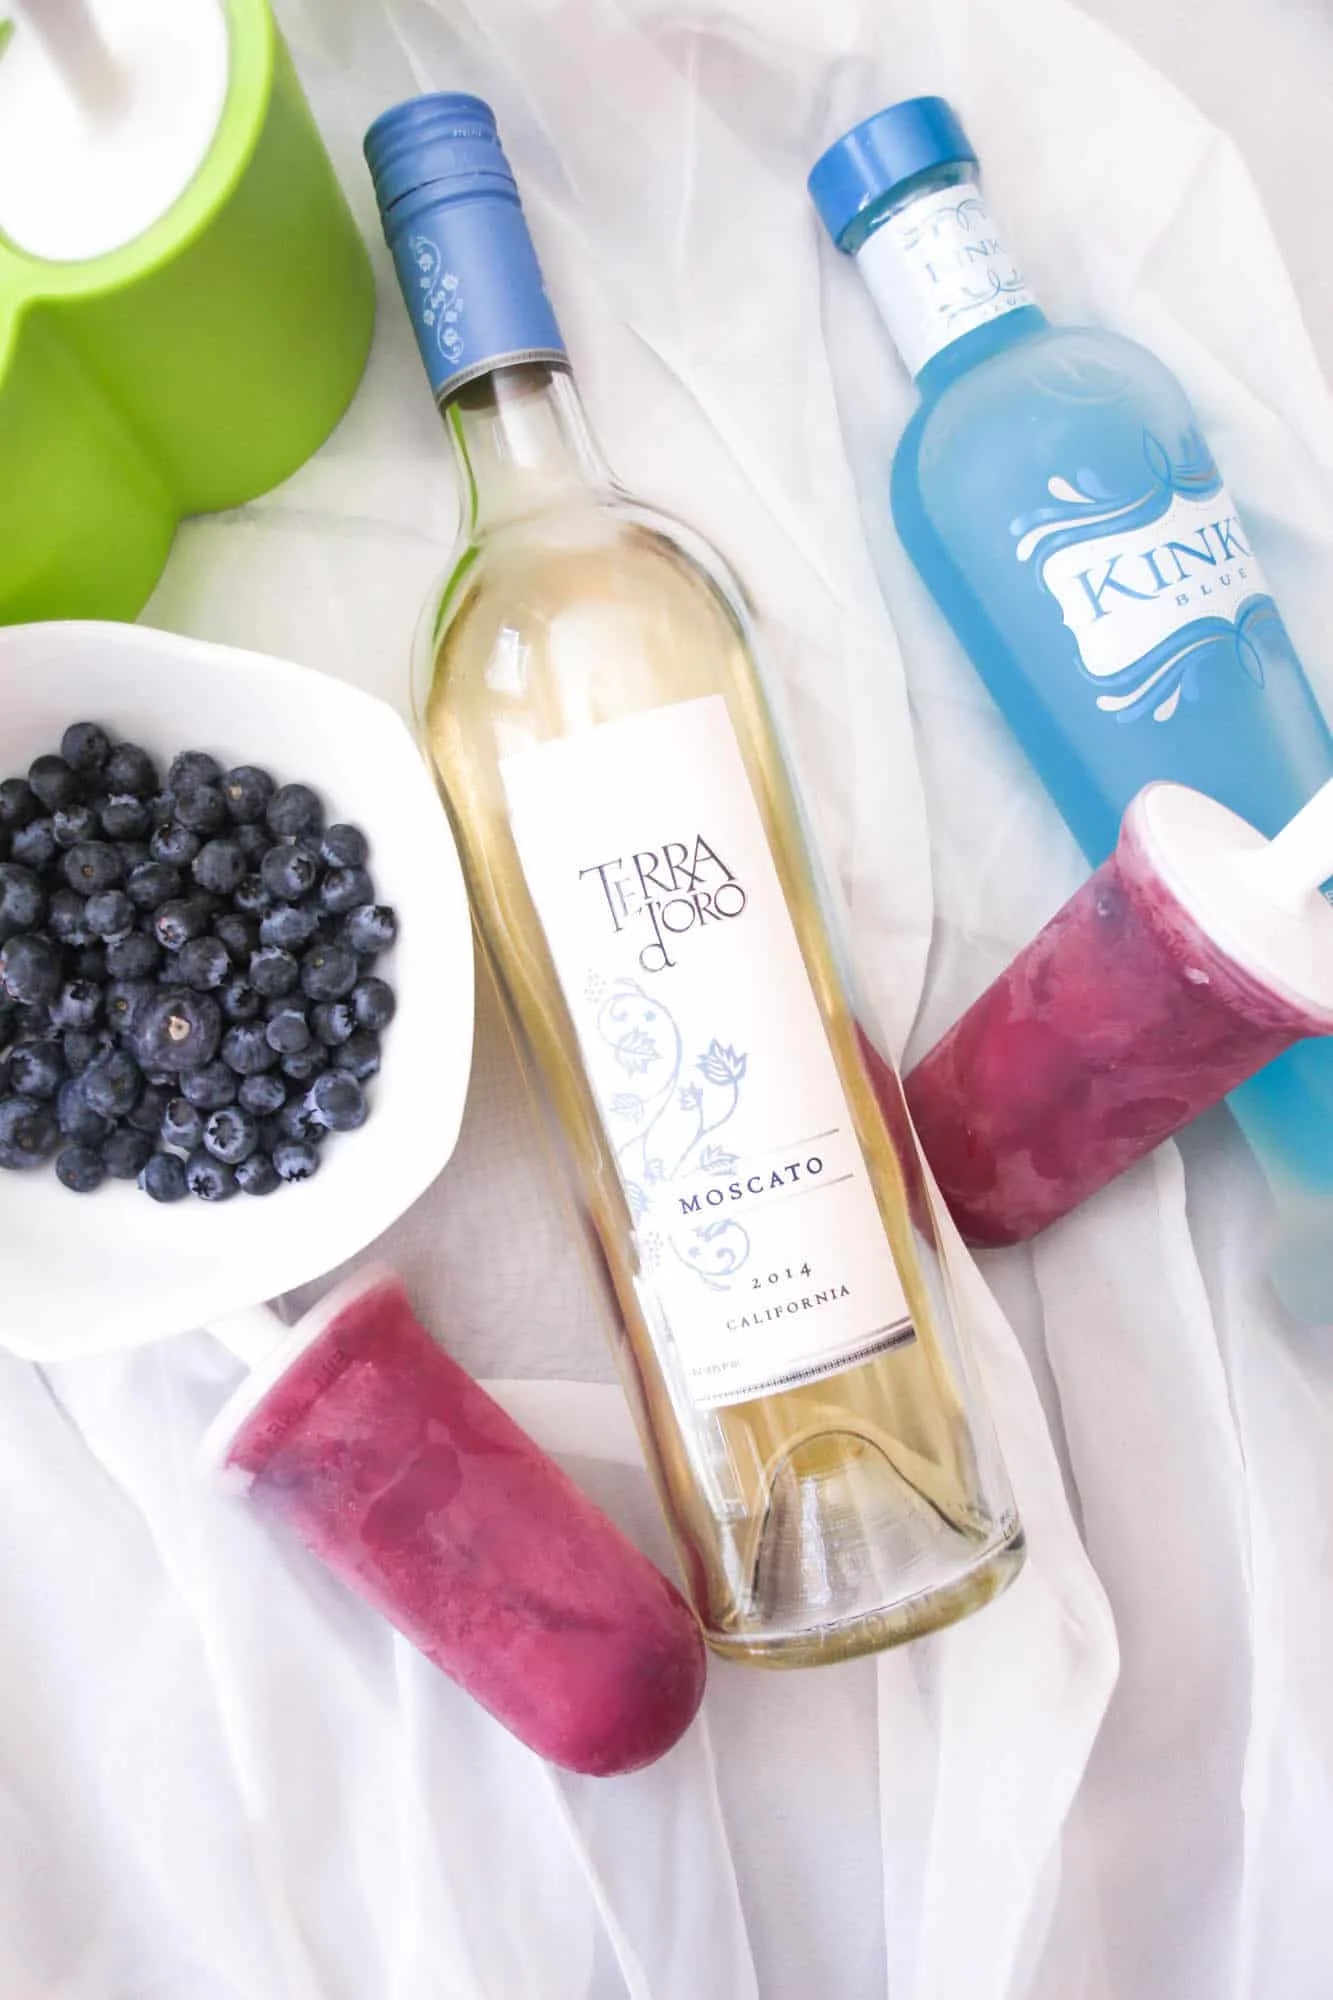 Terra d'oro moscato wine, blueberries, Kinky Blue, and boozy popsicles